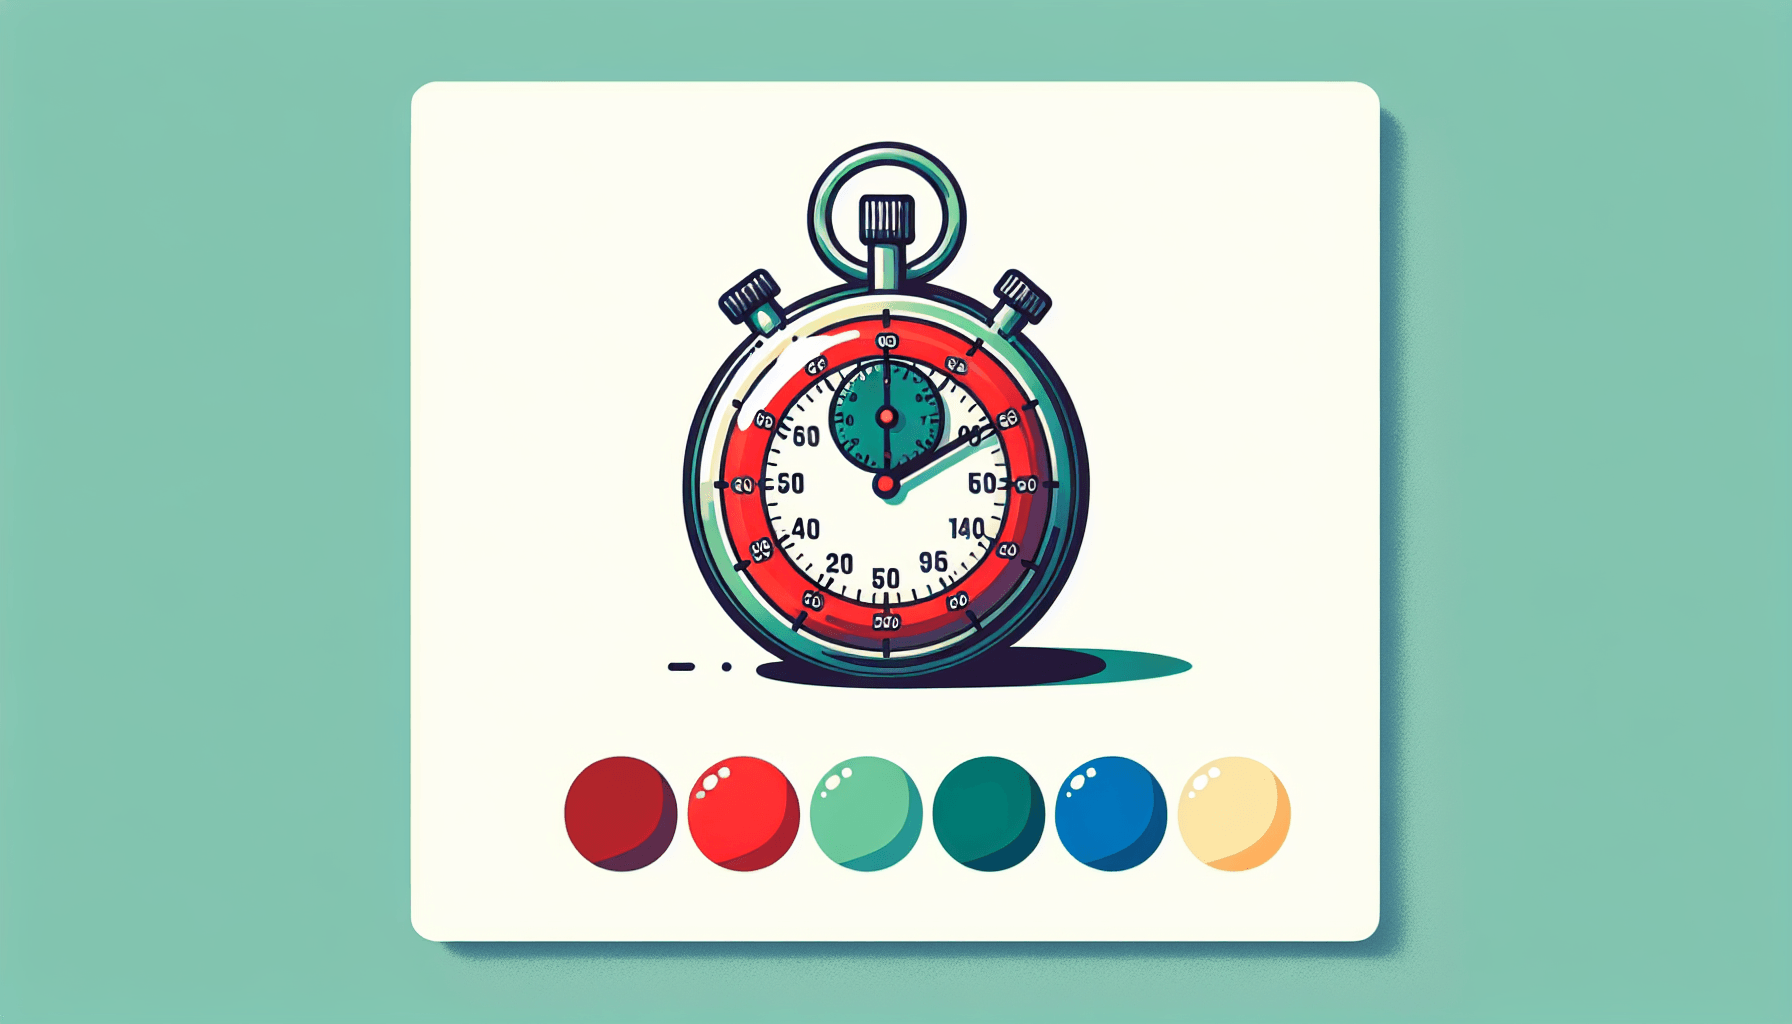 Stopwatch in flat illustration style and white background, red #f47574, green #88c7a8, yellow #fcc44b, and blue #645bc8 colors.